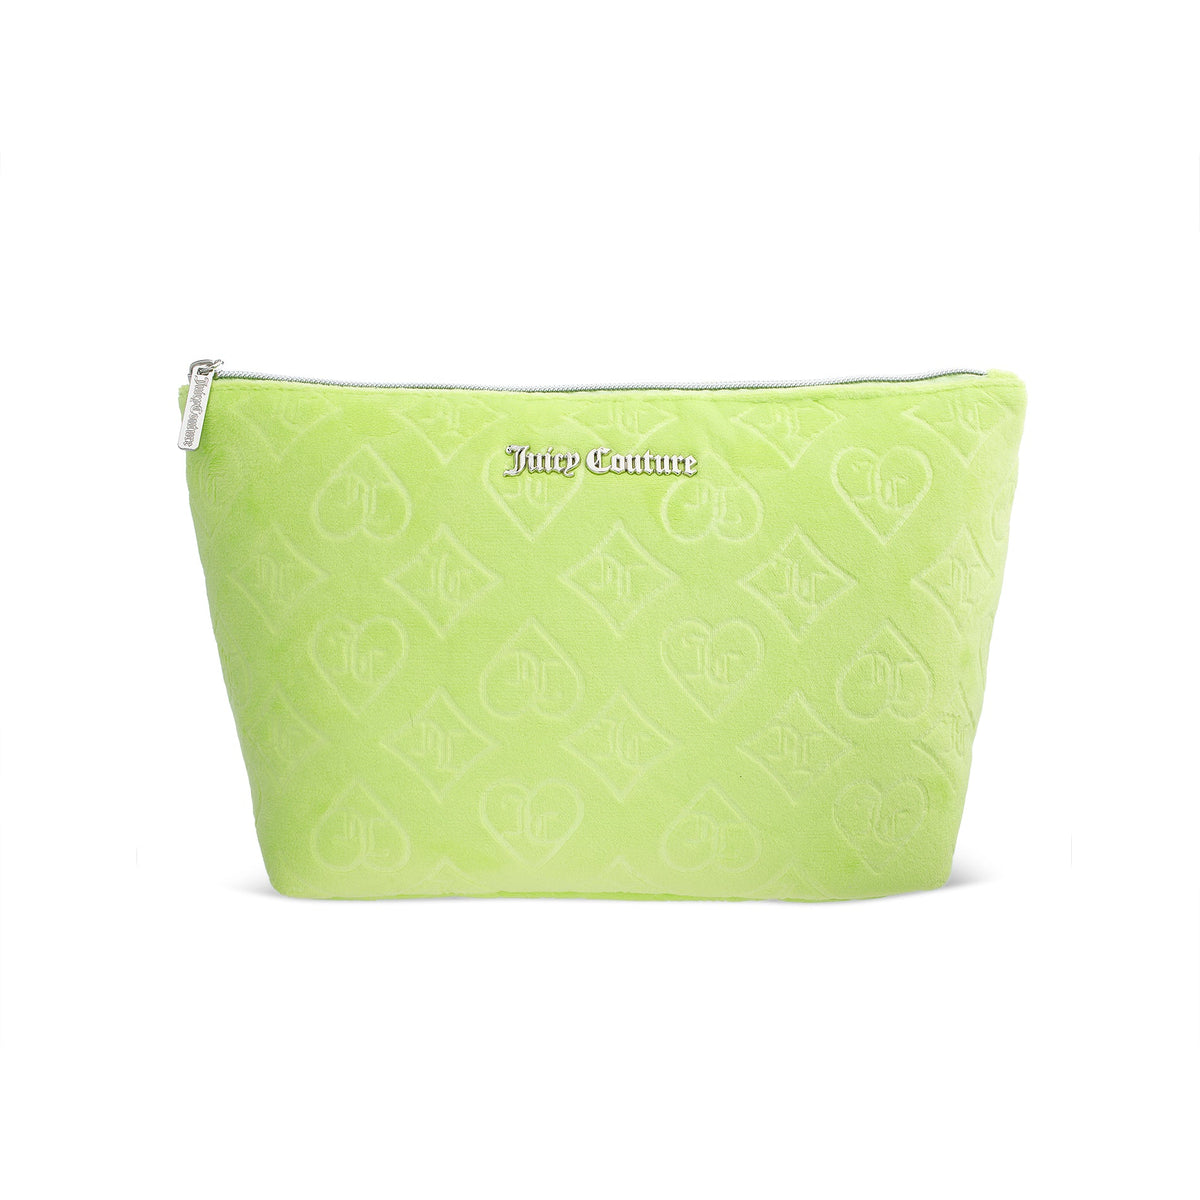 Juicy Couture Wedge Makeup Bag Lime